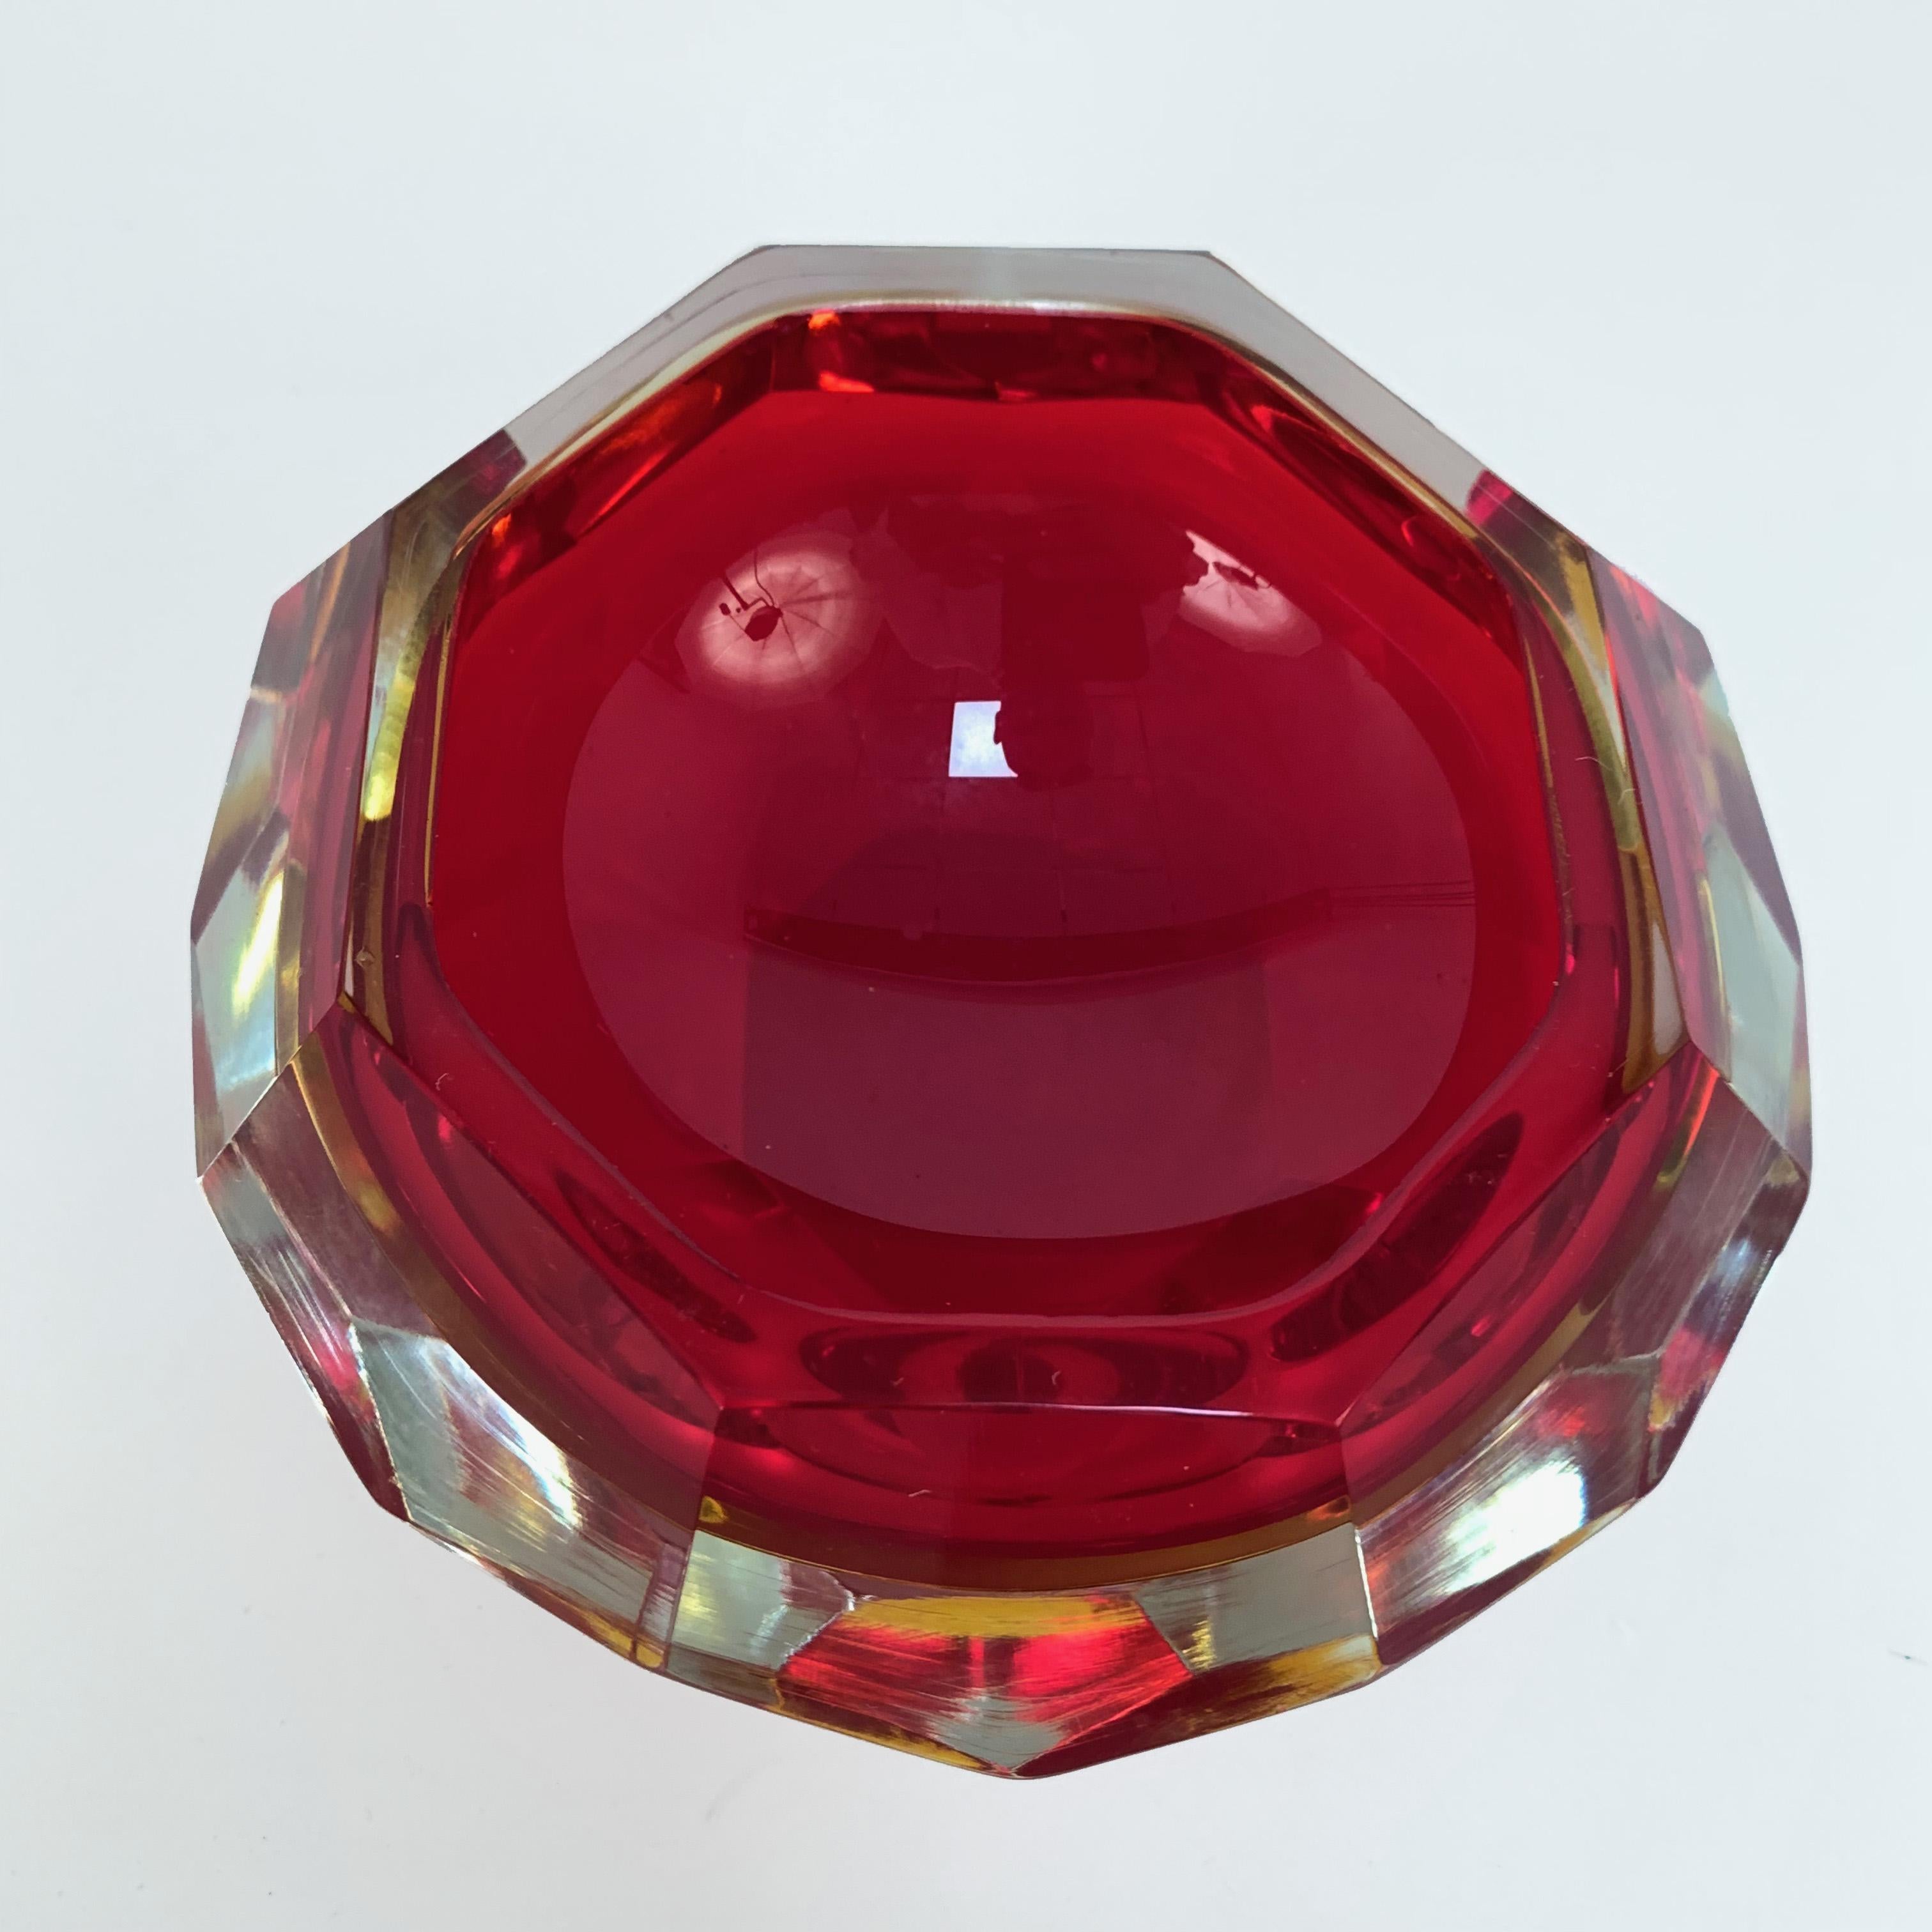 Mid-Century Modern Murano Ashtray, Flavio Poli, Submerged Glass, Red Faceted Glass, Italy, 1950s For Sale